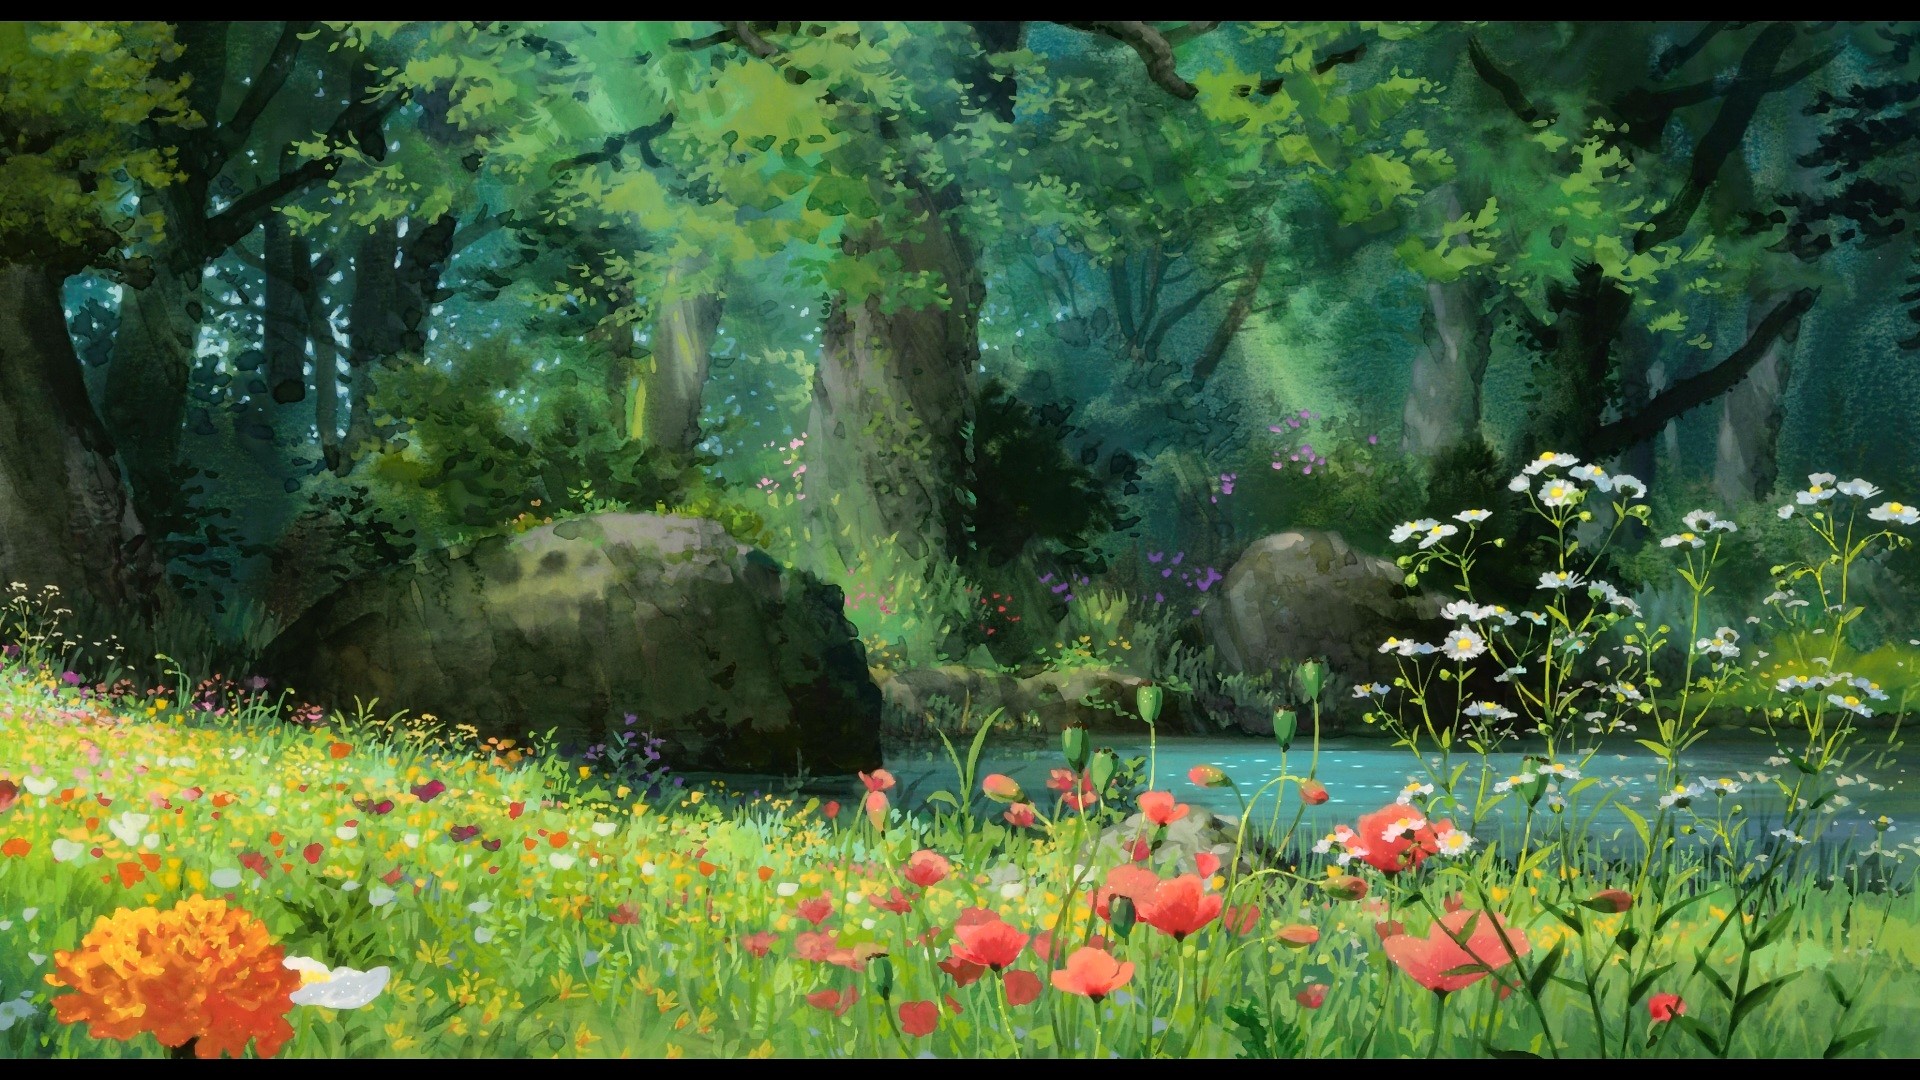 Anime Forest Background 69 images